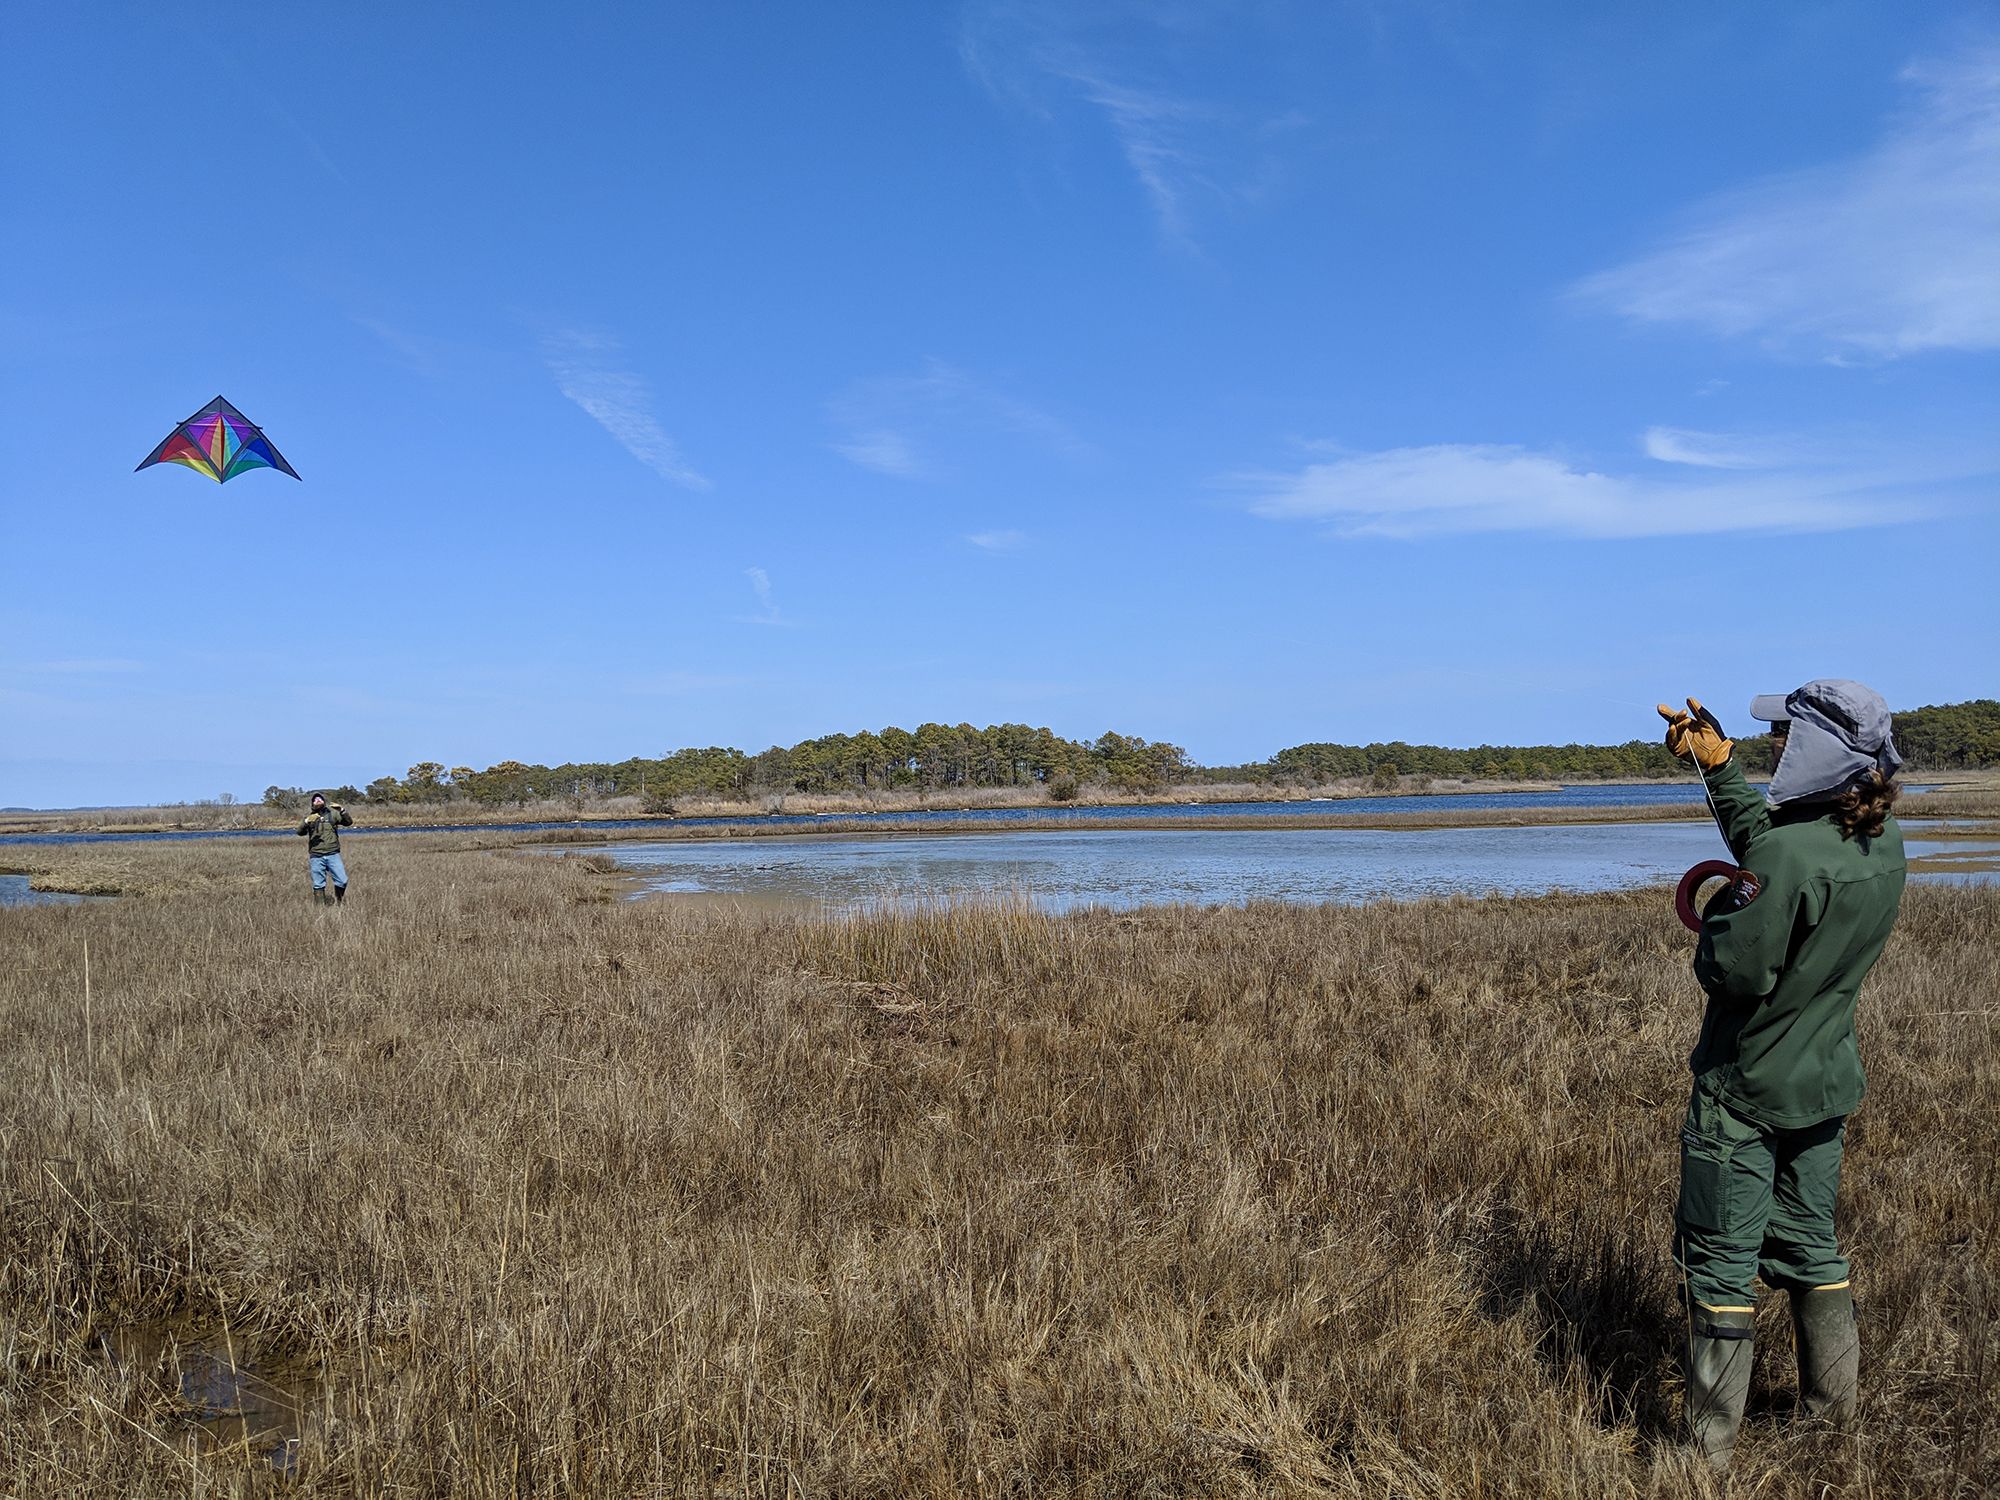 A person stands in a marsh area holding the end of a large, rainbow kite. Another person stands underneath, looking up at it.